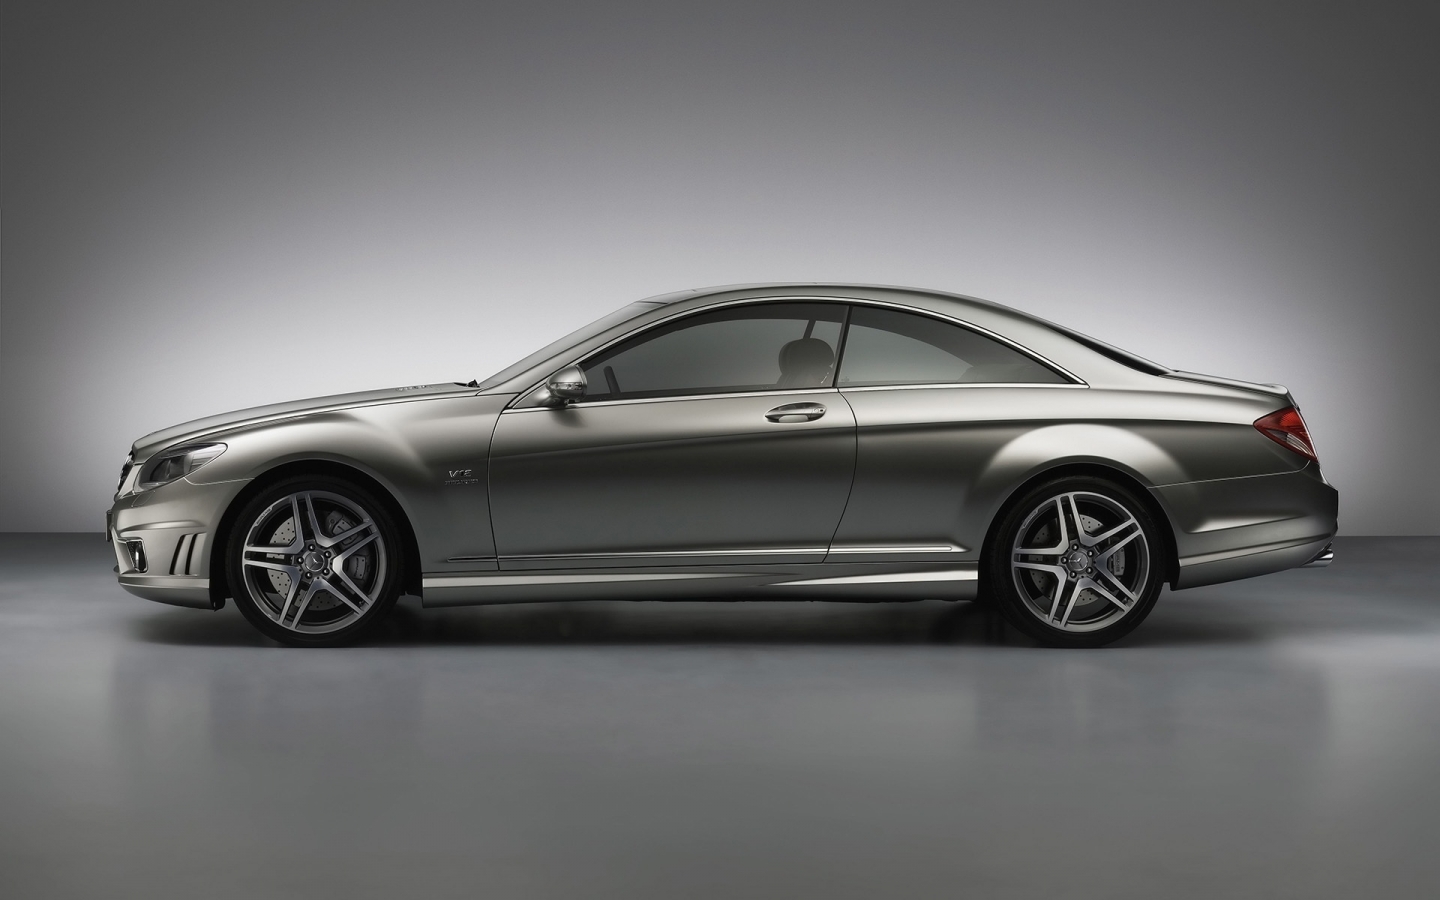 Mercedes Benz CL65 AMG 2008 for 1440 x 900 widescreen resolution